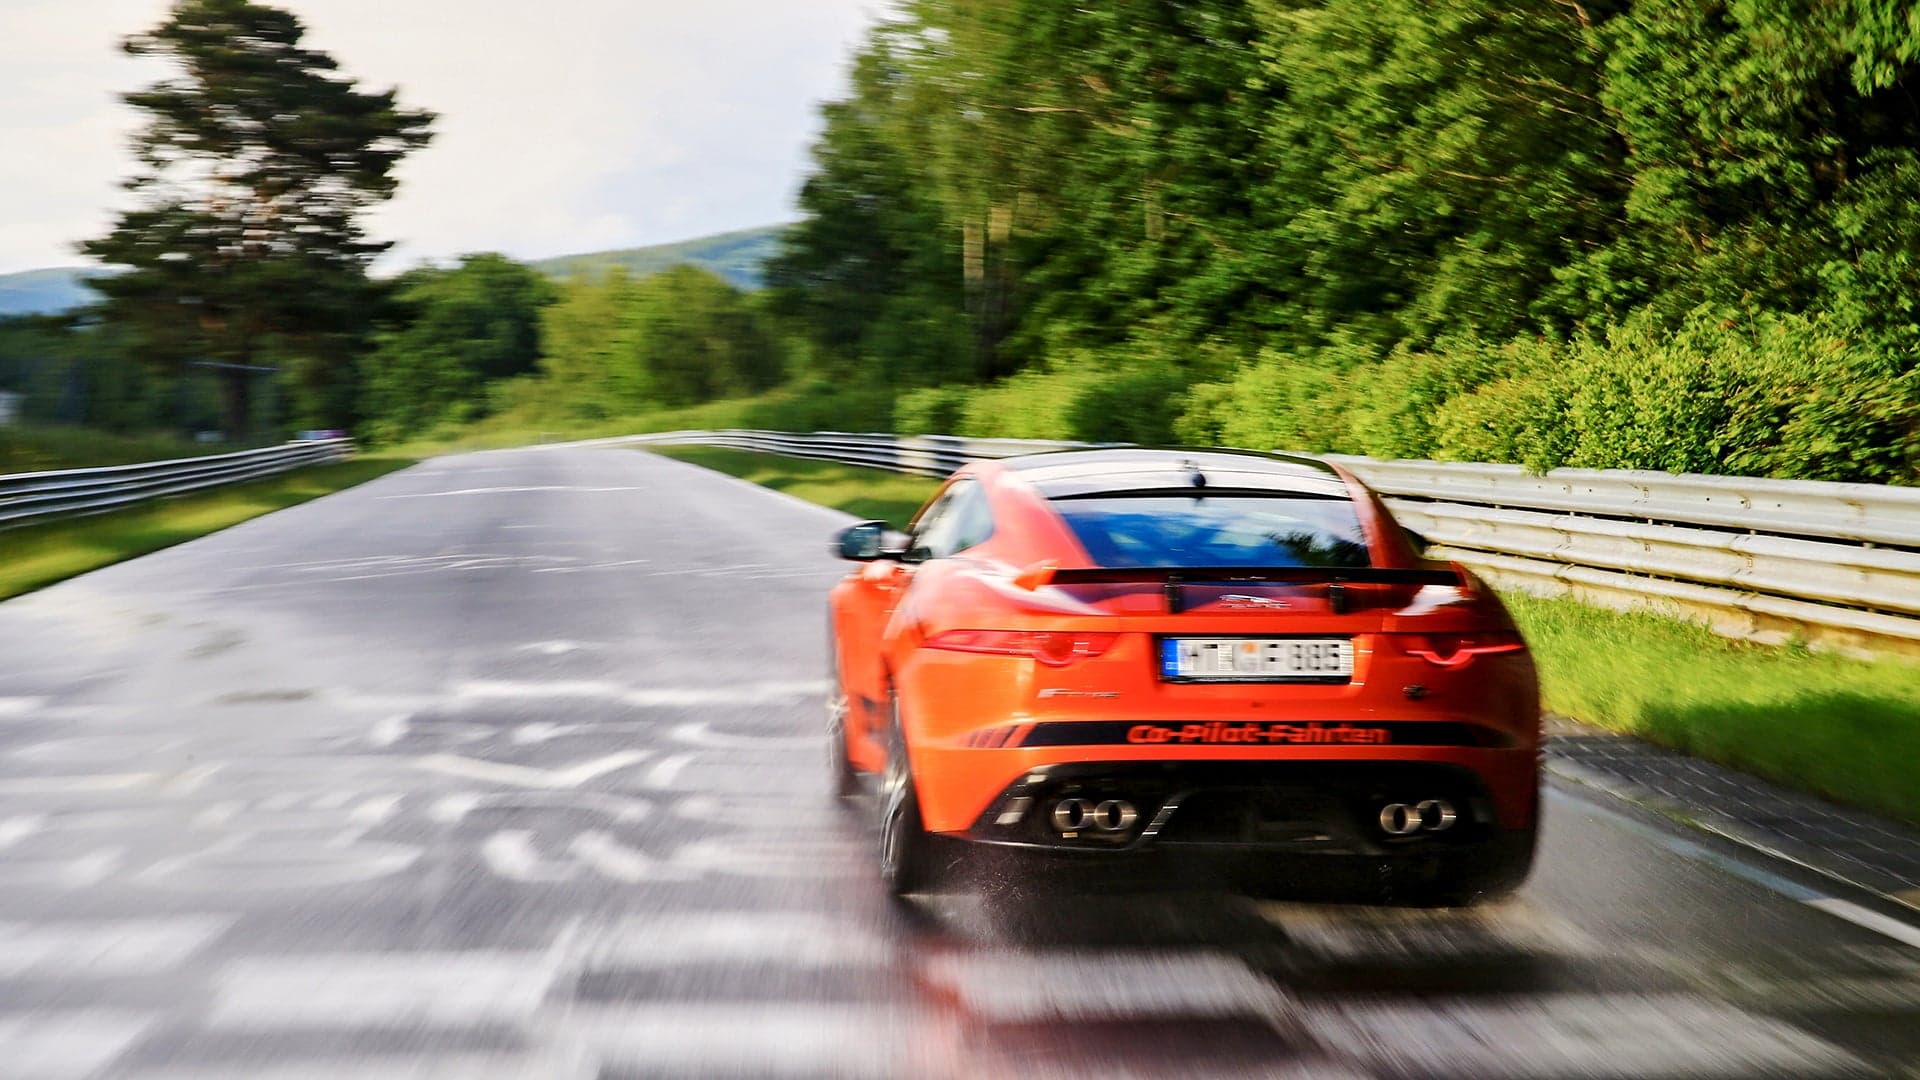 Jaguar May Be Turning the F-Type Into a GT4 Race Car